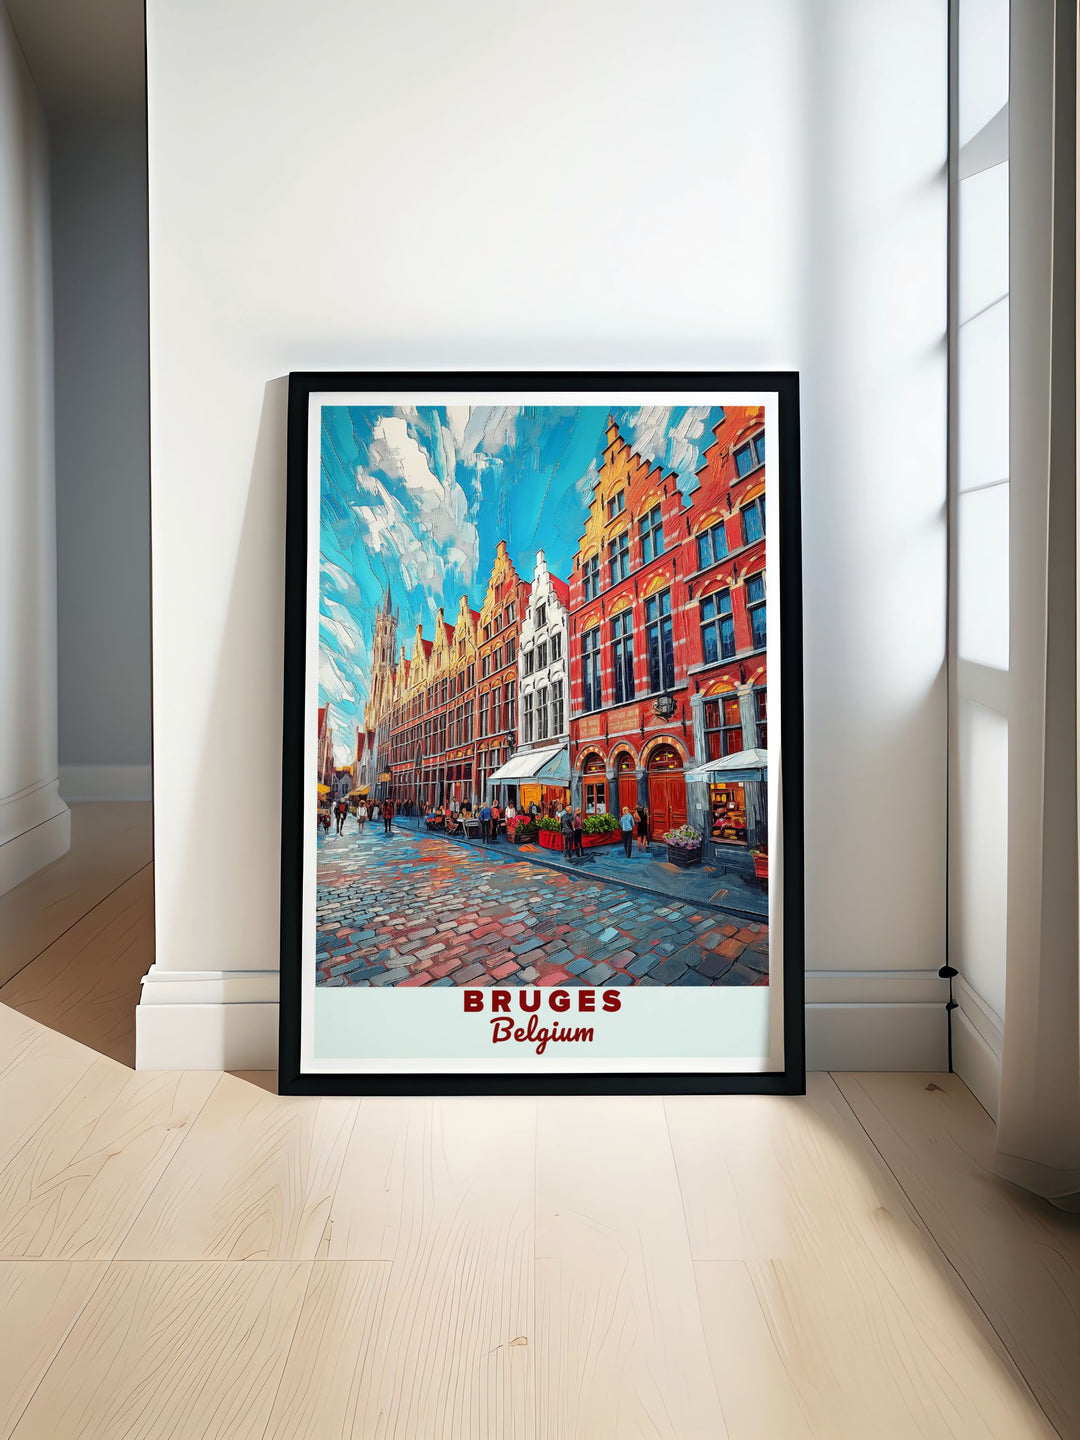 Beautiful Belgium travel art featuring the iconic Grote Markt in Bruges. This stunning artwork captures the vibrant atmosphere and historic architecture of the square, making it a perfect addition to any home decor or as a unique travel gift.